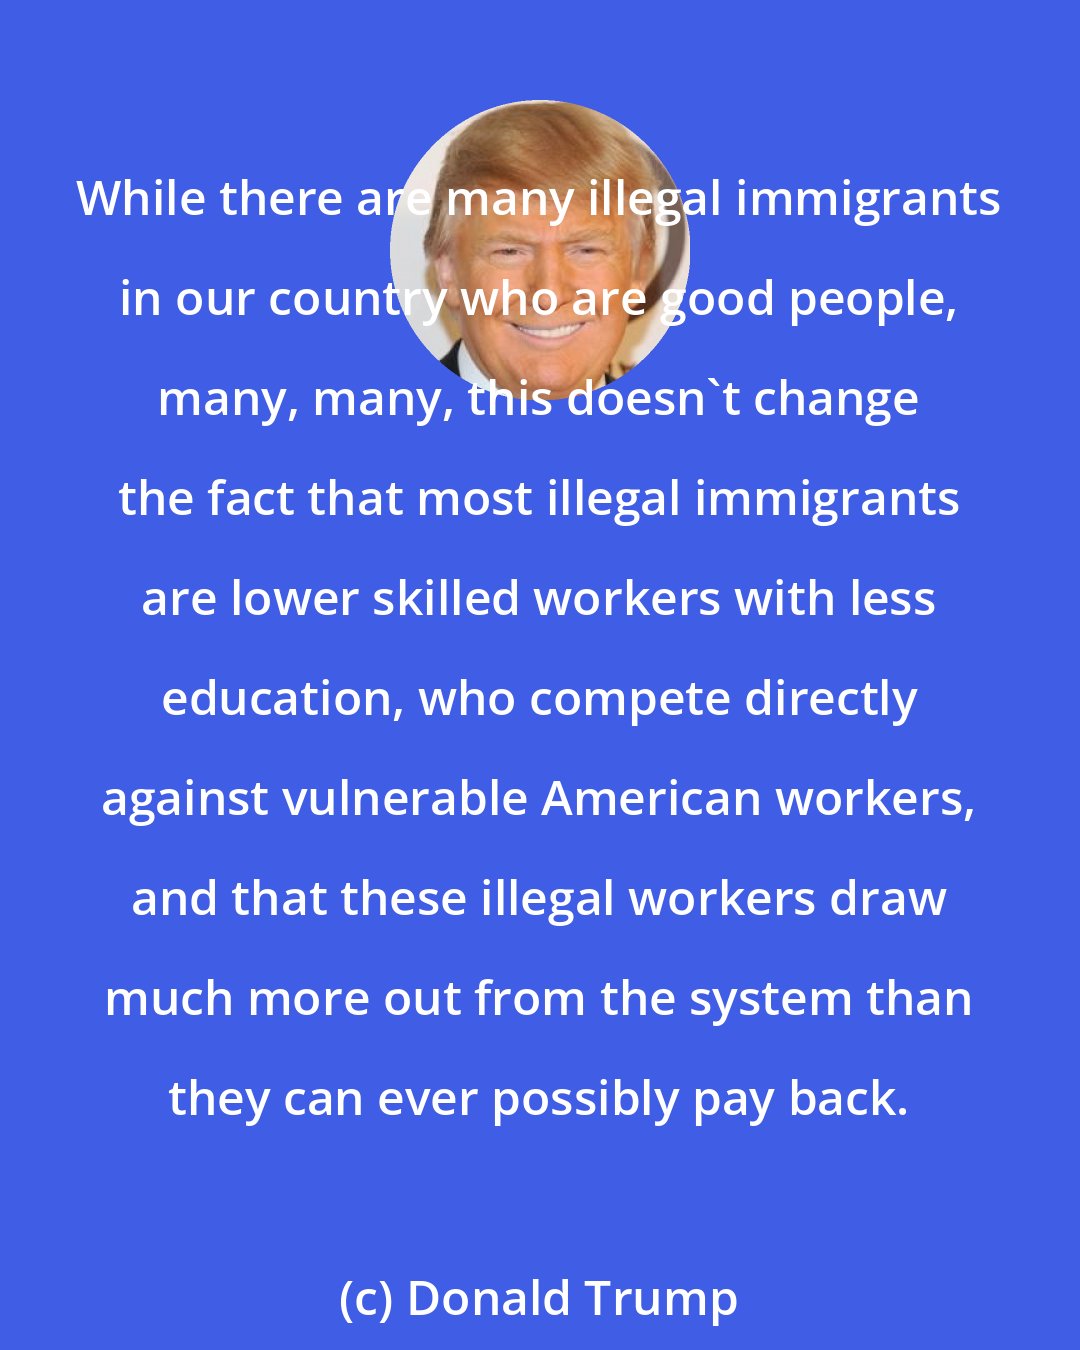 Donald Trump: While there are many illegal immigrants in our country who are good people, many, many, this doesn't change the fact that most illegal immigrants are lower skilled workers with less education, who compete directly against vulnerable American workers, and that these illegal workers draw much more out from the system than they can ever possibly pay back.